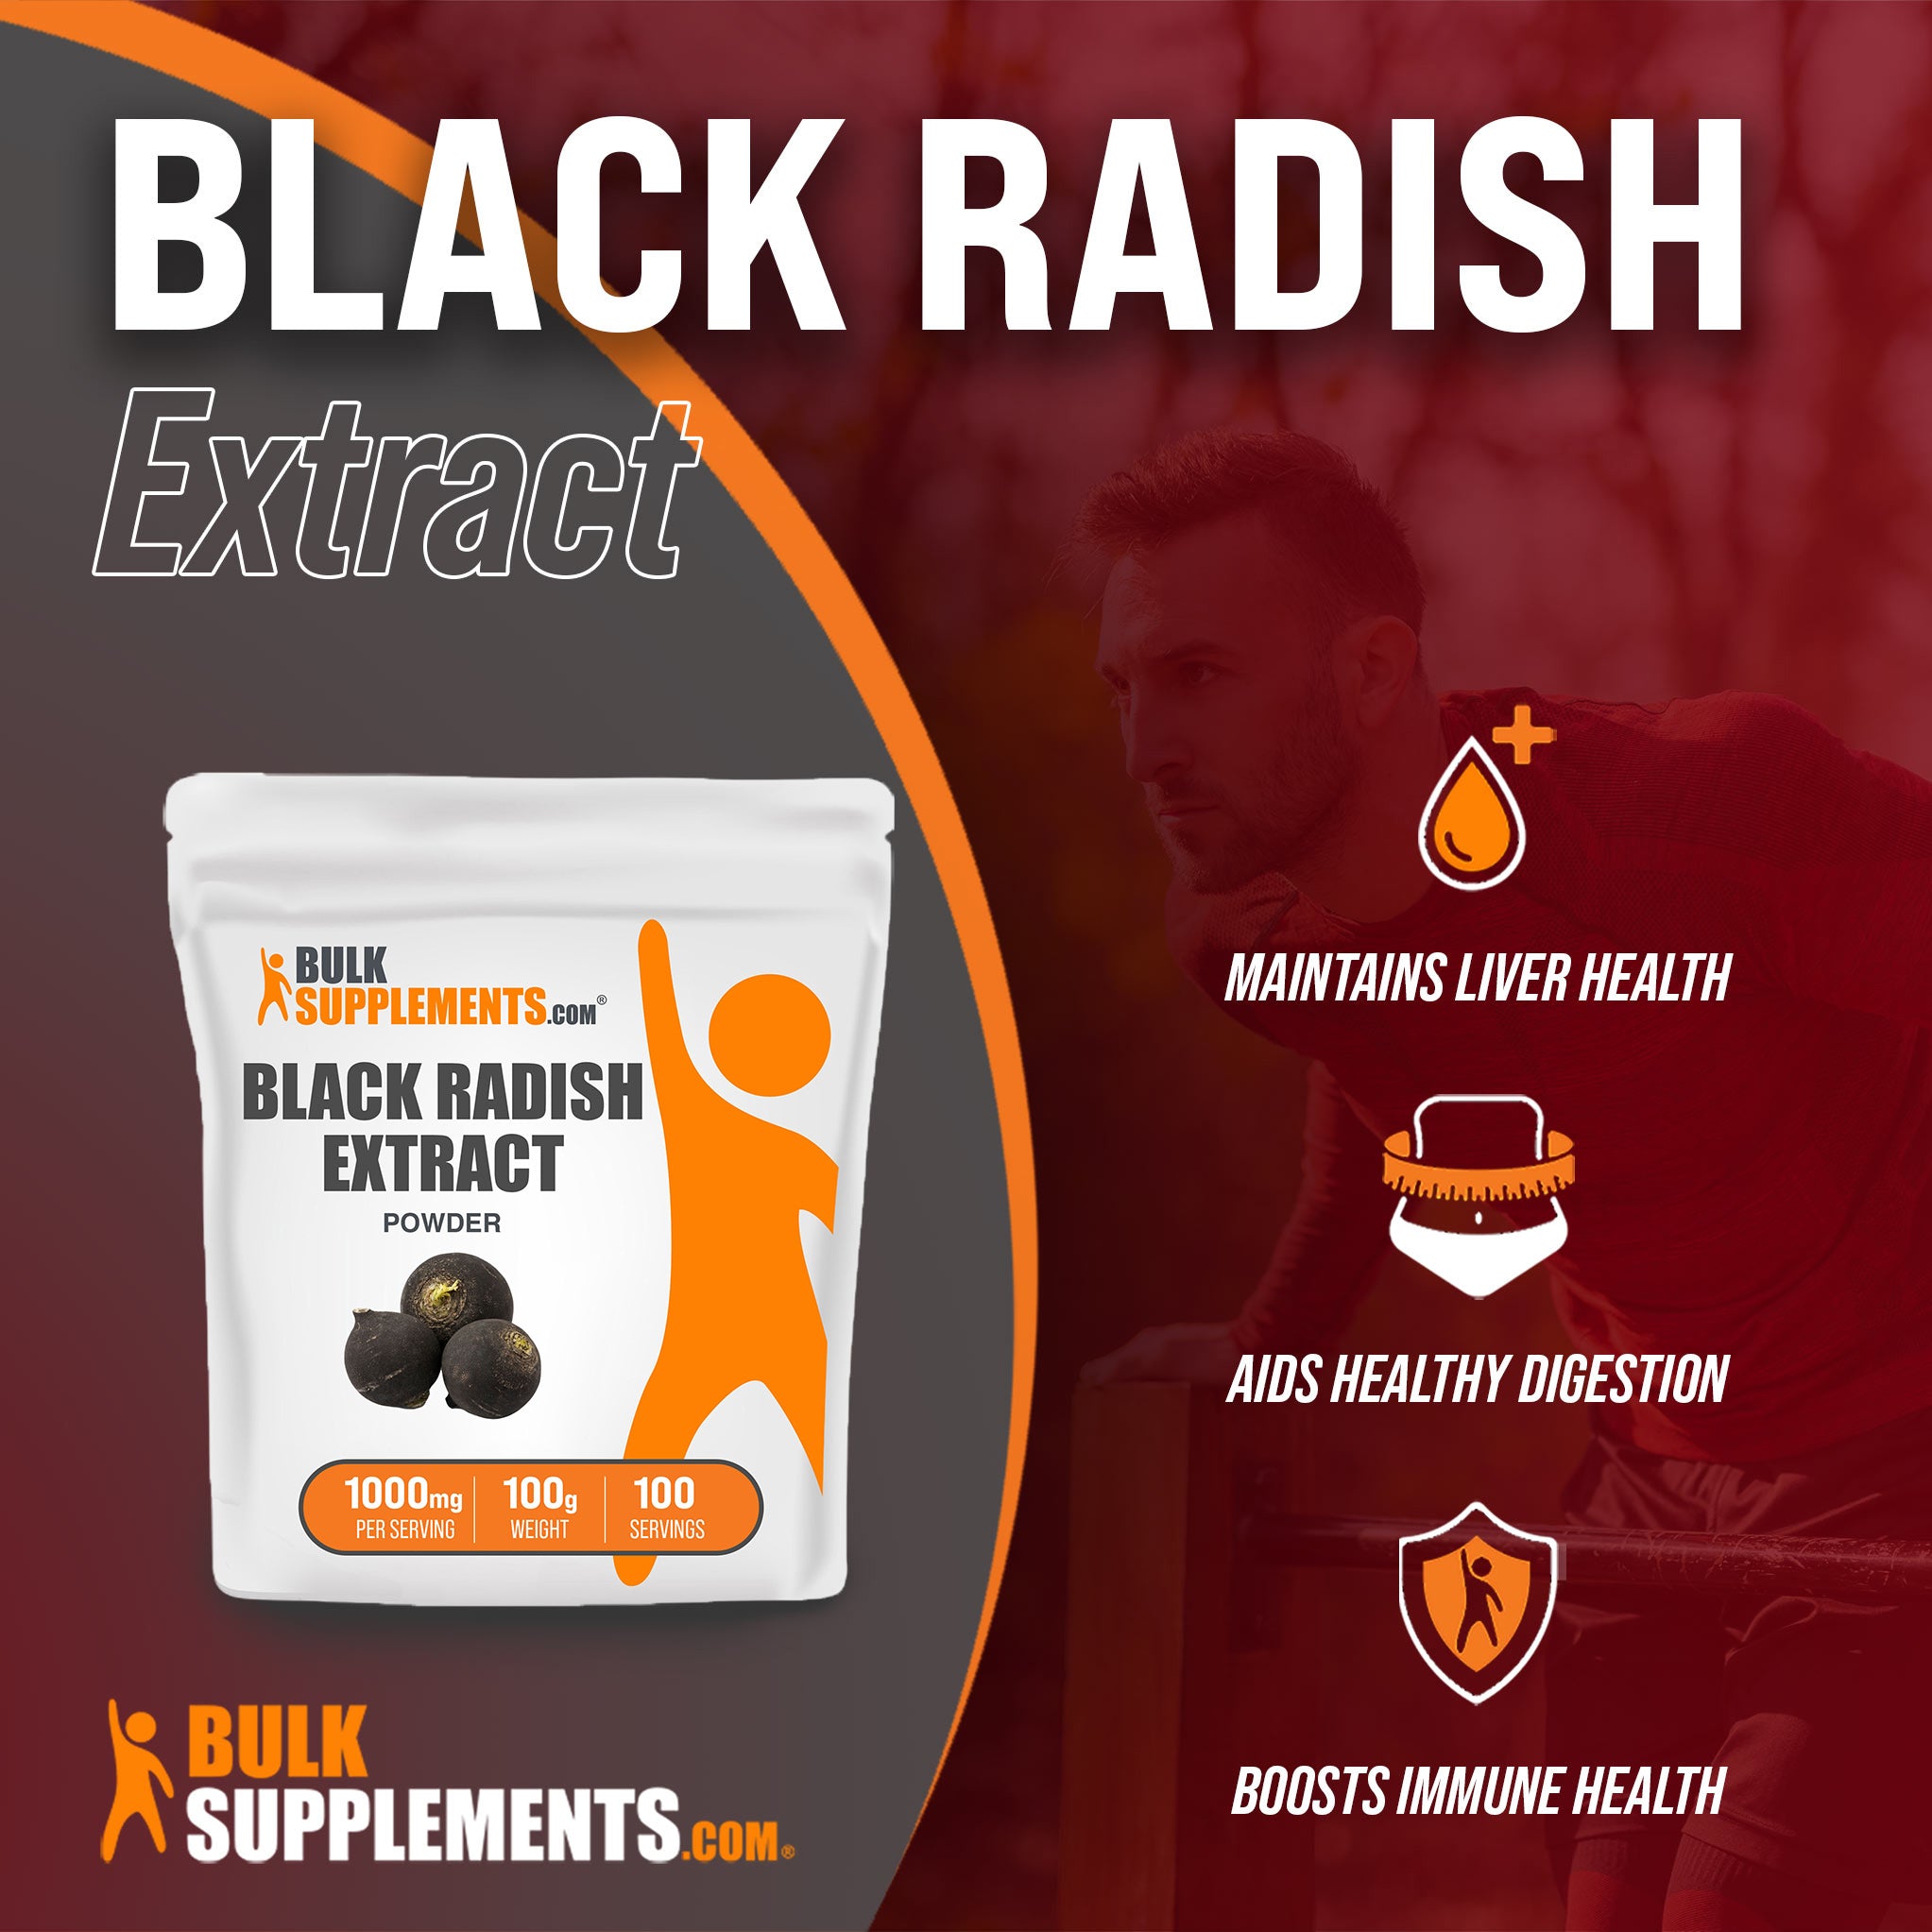 100g of Black Radish Extract is an ideal liver supplement